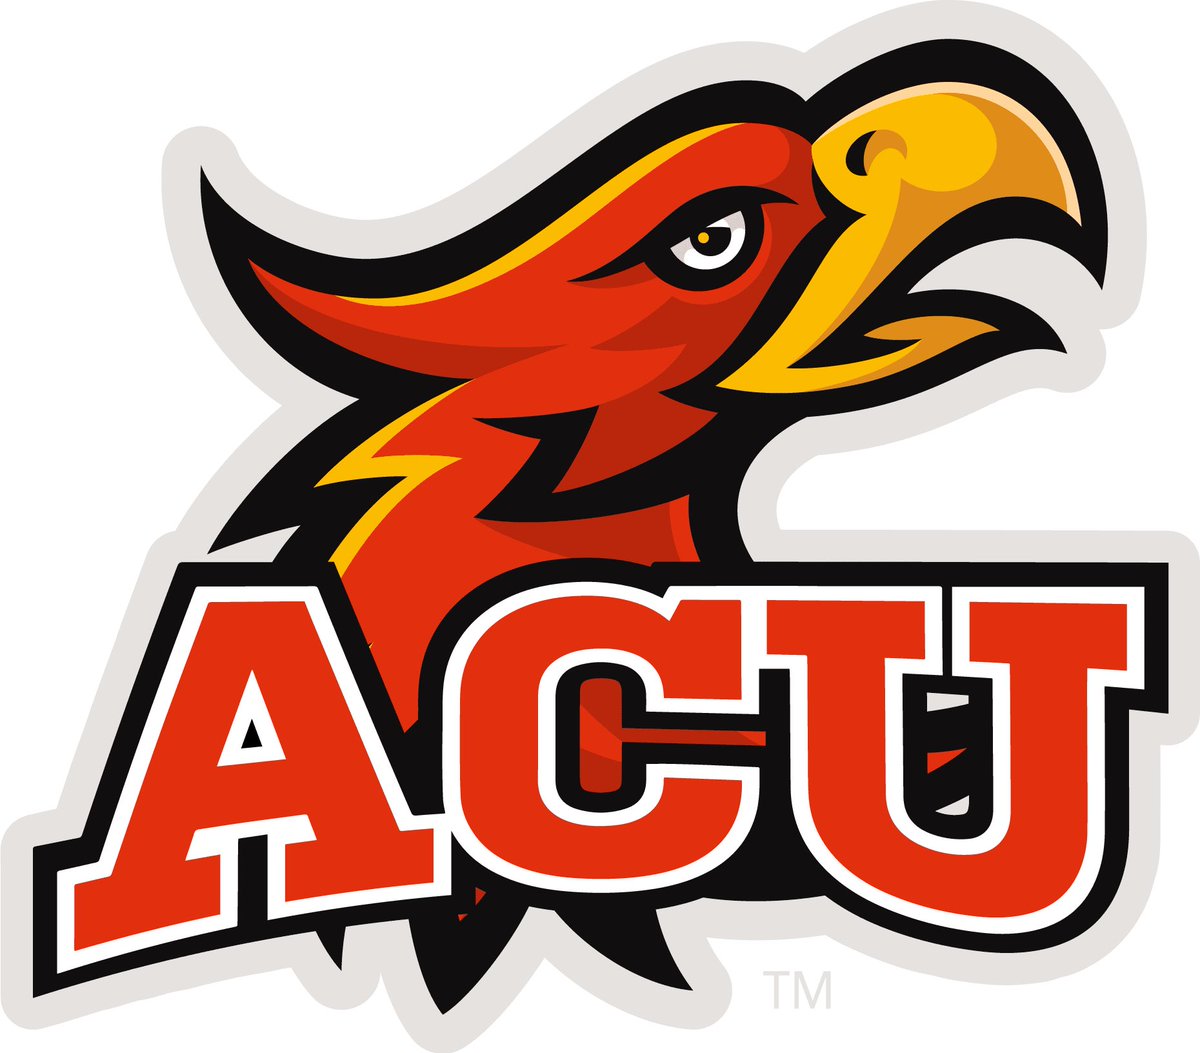 Blessed to say I received a opportunity to play on Arizona Christian University developmental team #AGTG